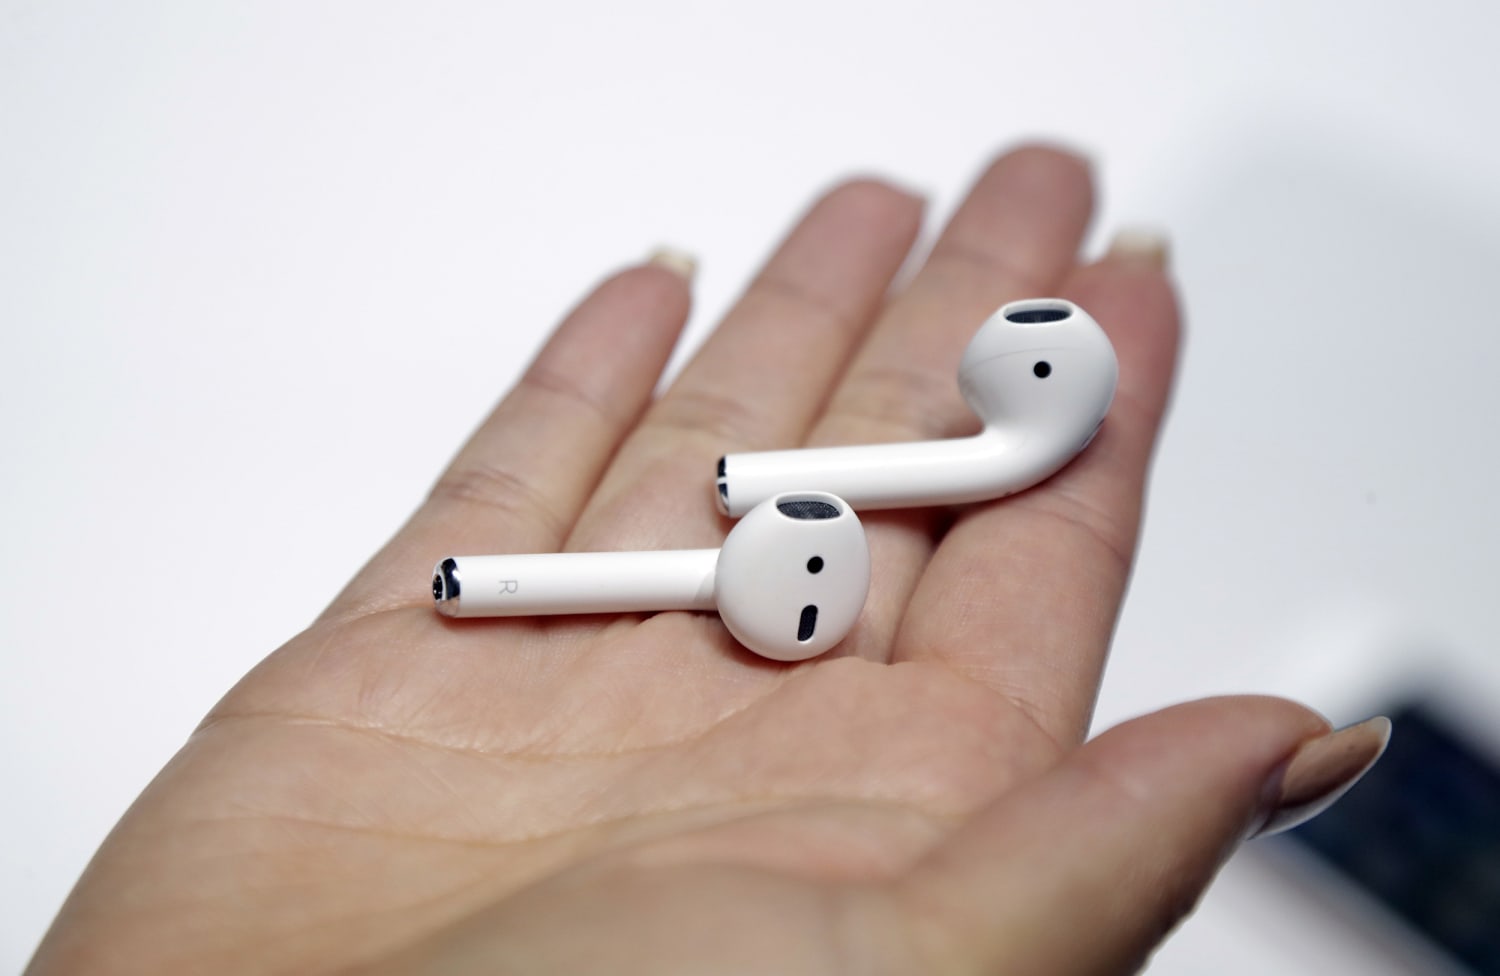 Apple's AirPods changed everything. They gave the near-monopolistic power over users.